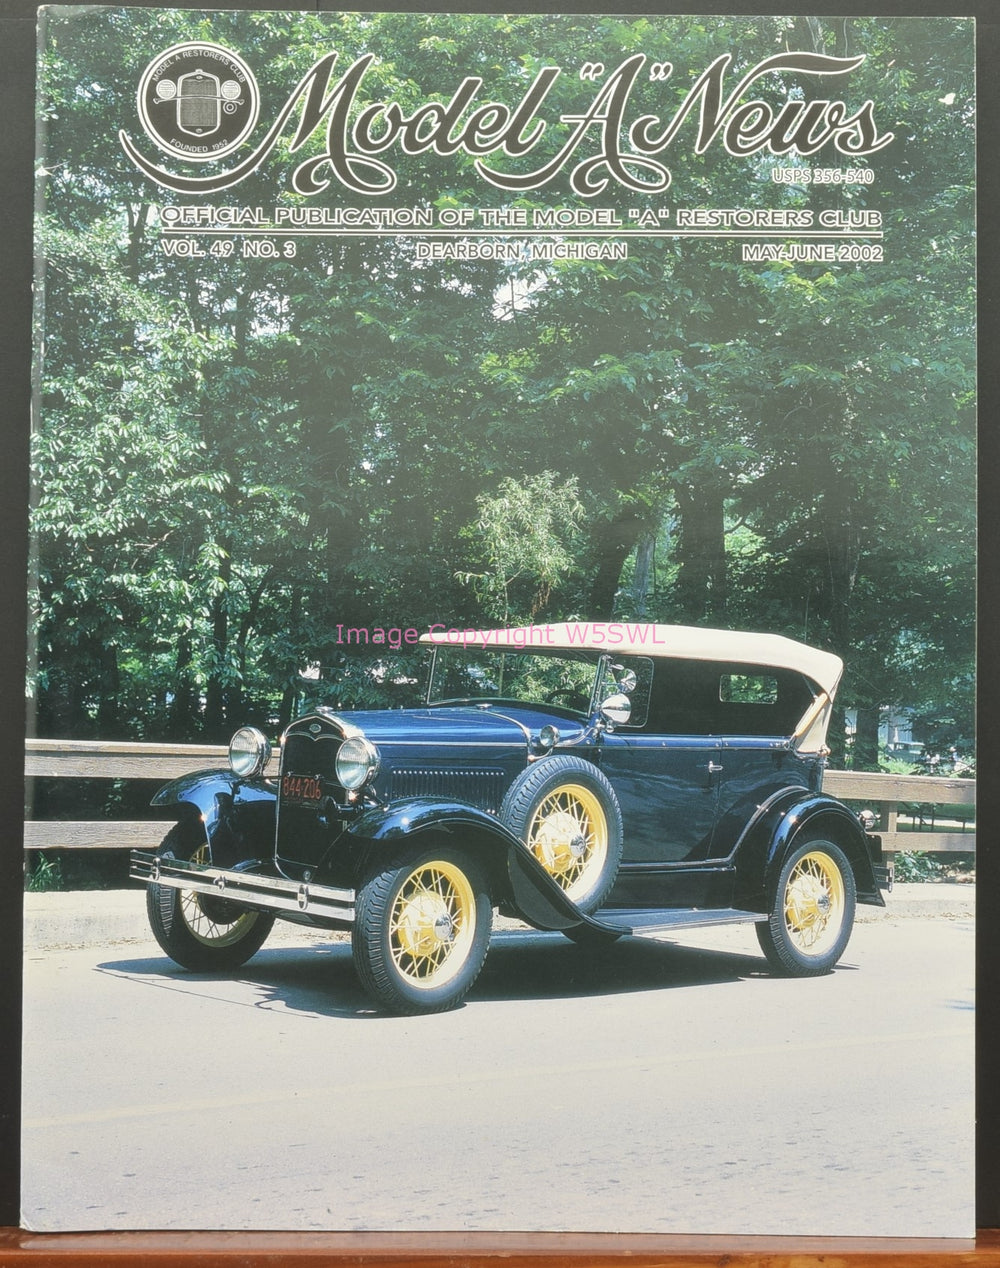 Model A News Restorers Club Vol 49 No 3 May-June 2002 - Dave's Hobby Shop by W5SWL